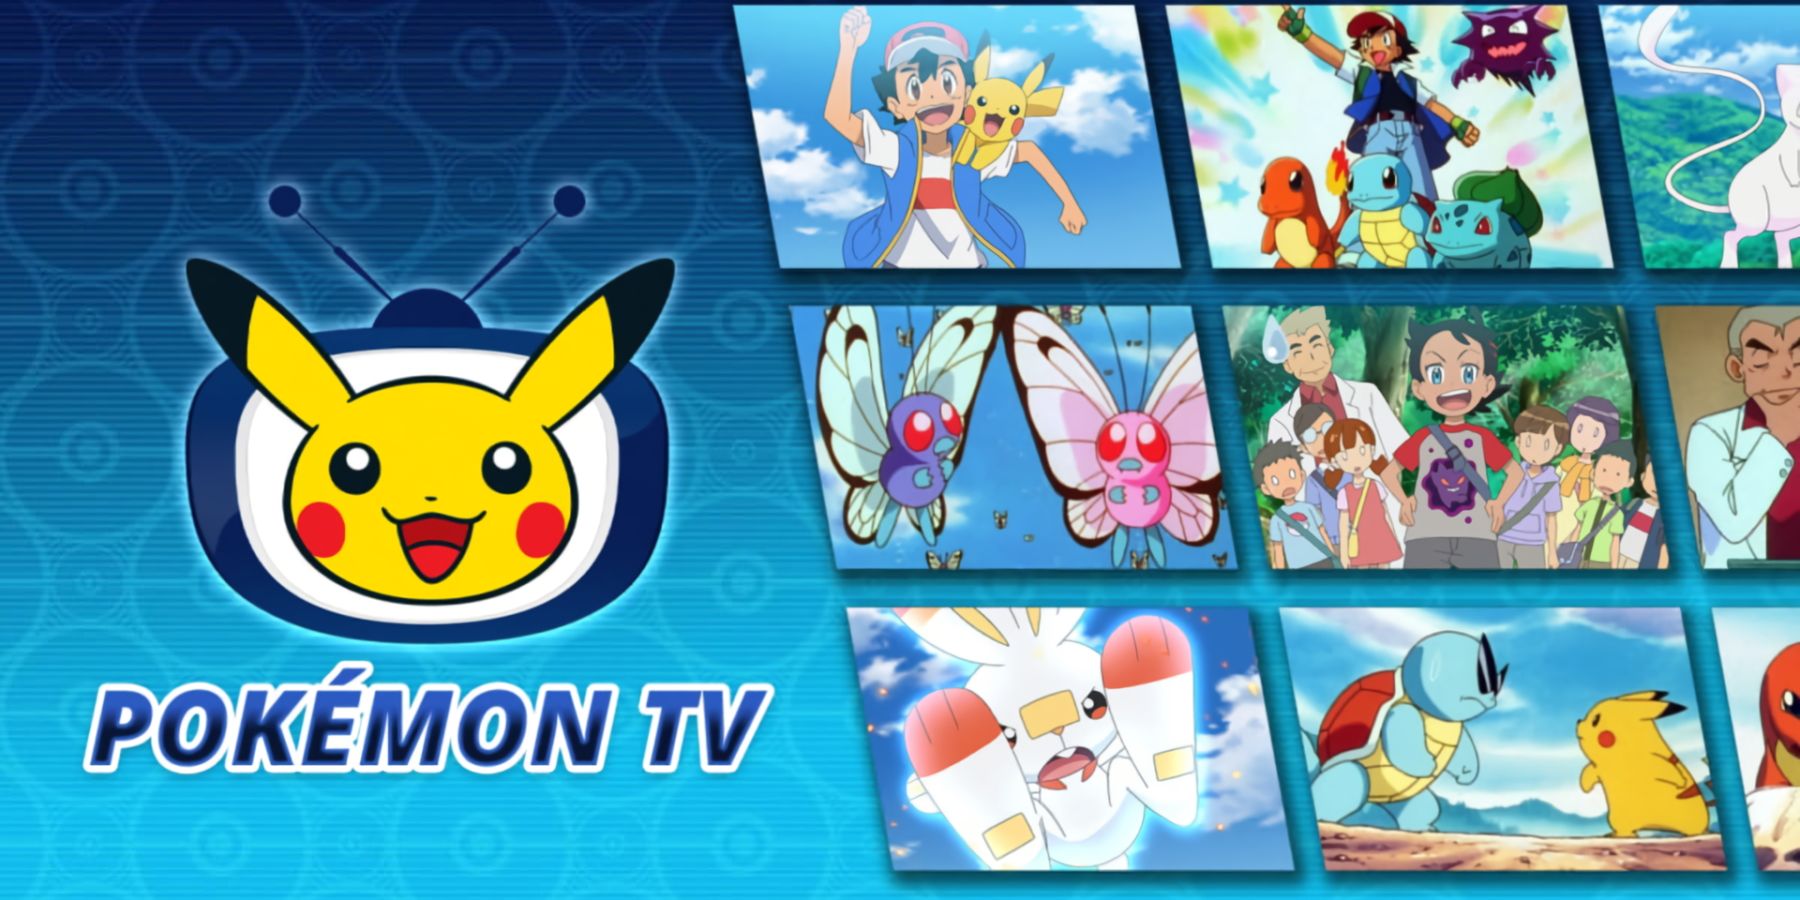 A promotional visual for the Pokemon TV app.